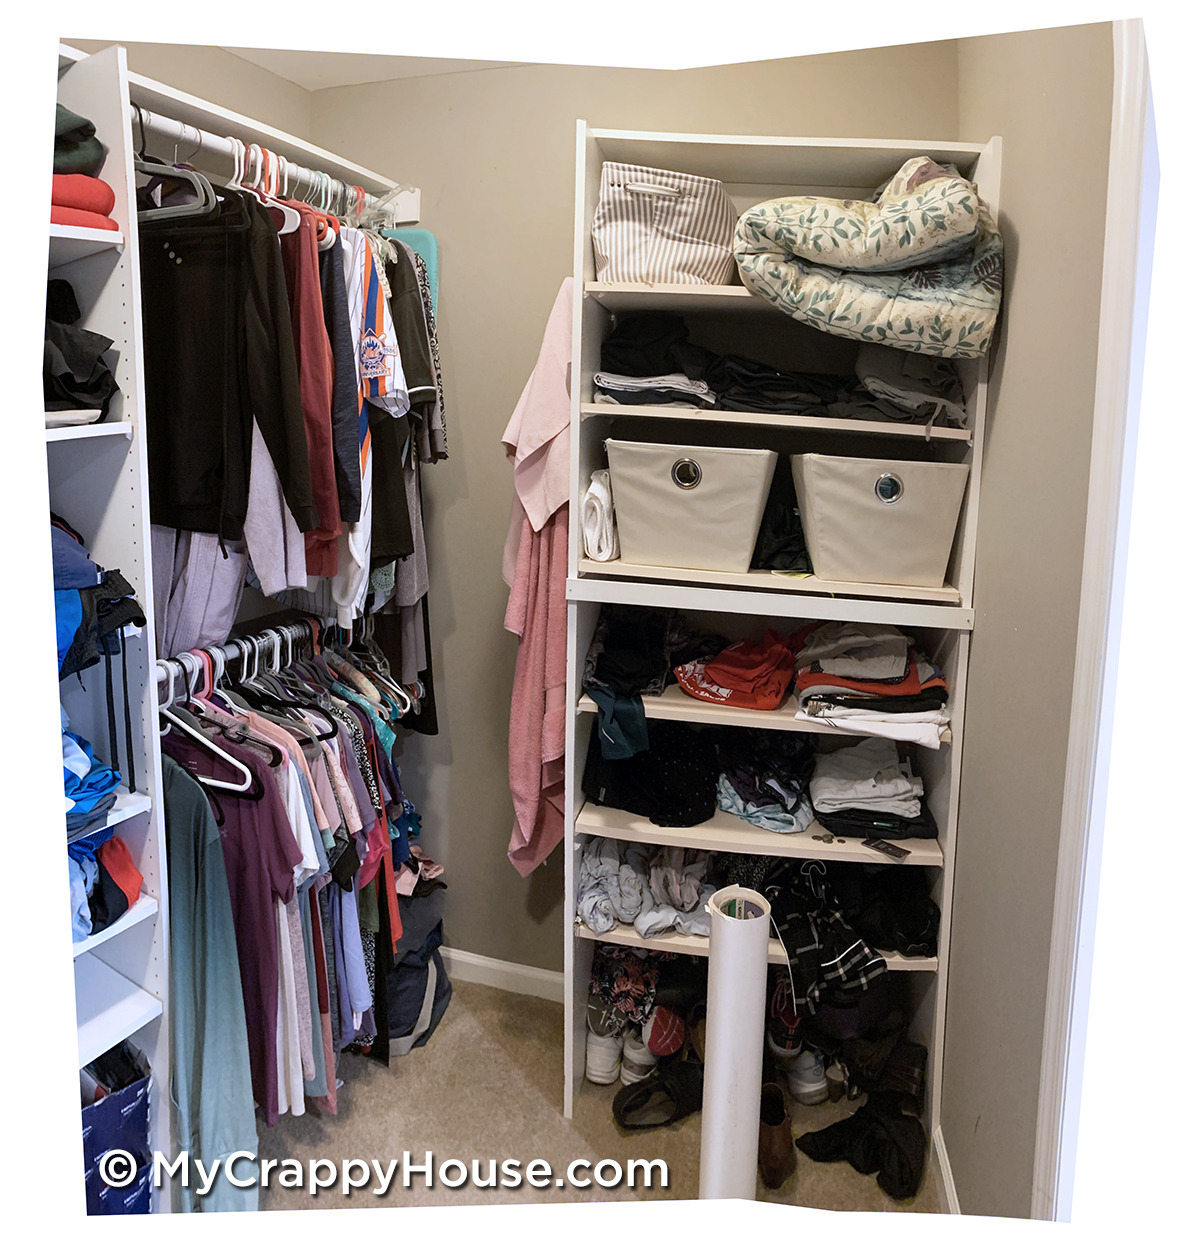 Shelves with clothes in a walk in closet